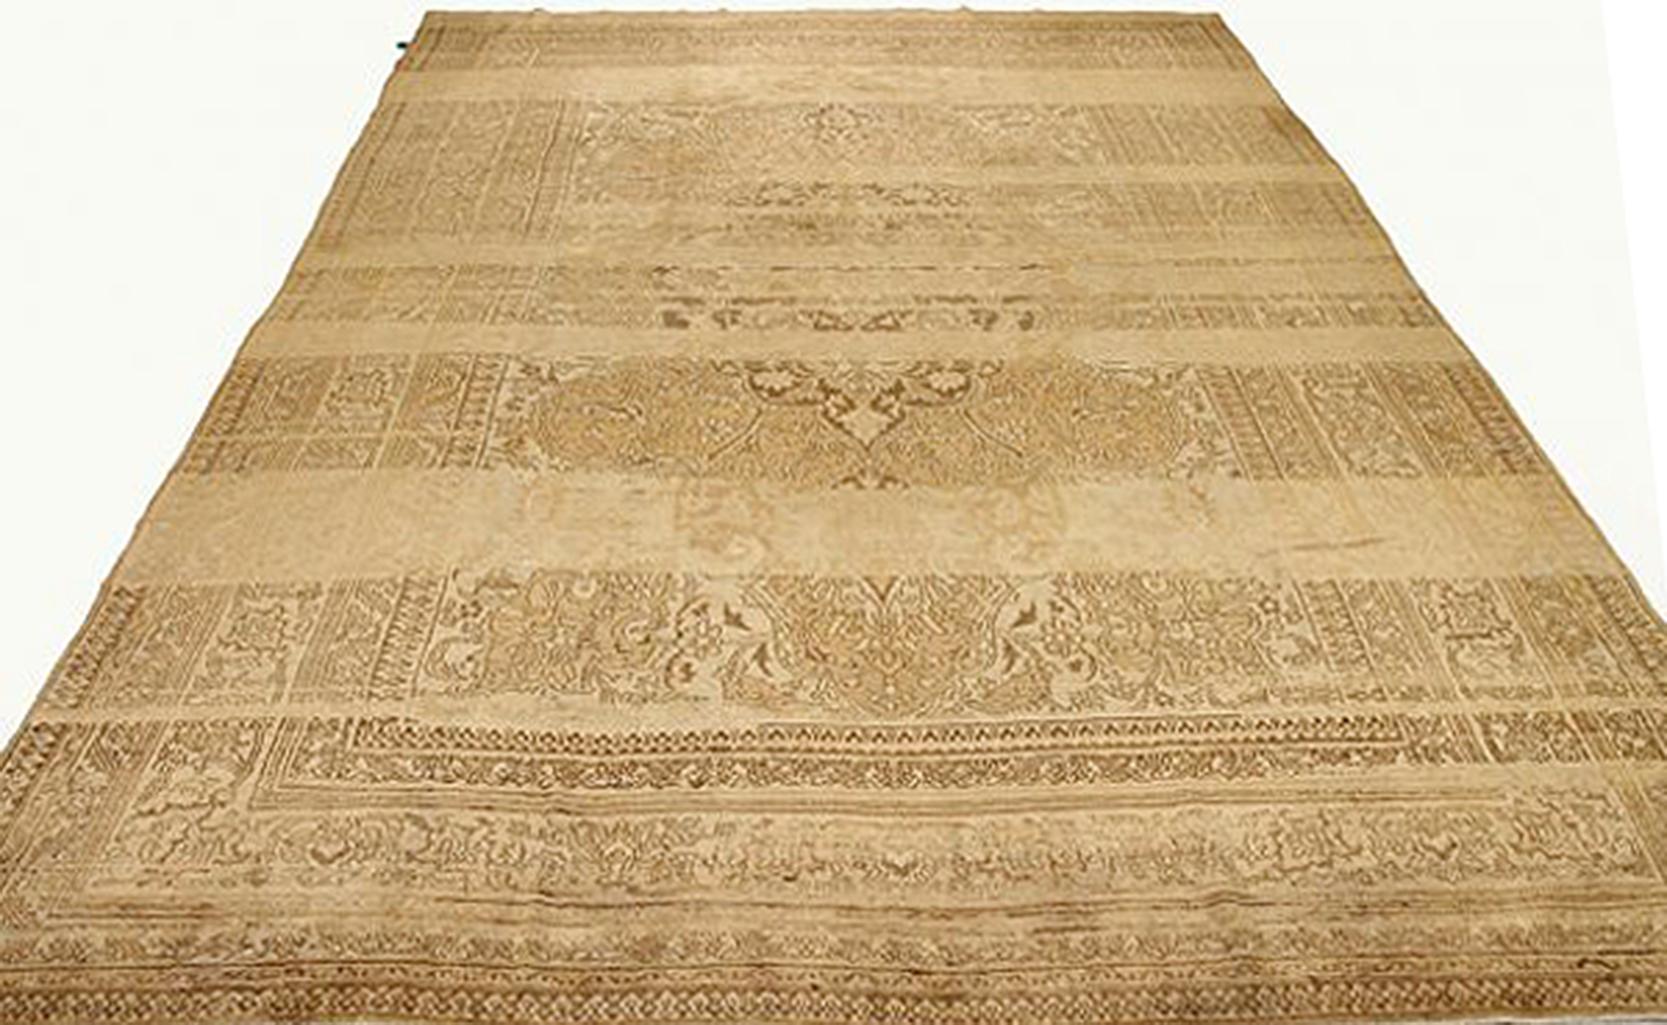 Antique Persian rug handwoven from the finest sheep’s wool and colored with all-natural vegetable dyes that are safe for humans and pets. It’s a traditional Doroksh design featuring floral details in brown and beige over an ivory field. It’s a